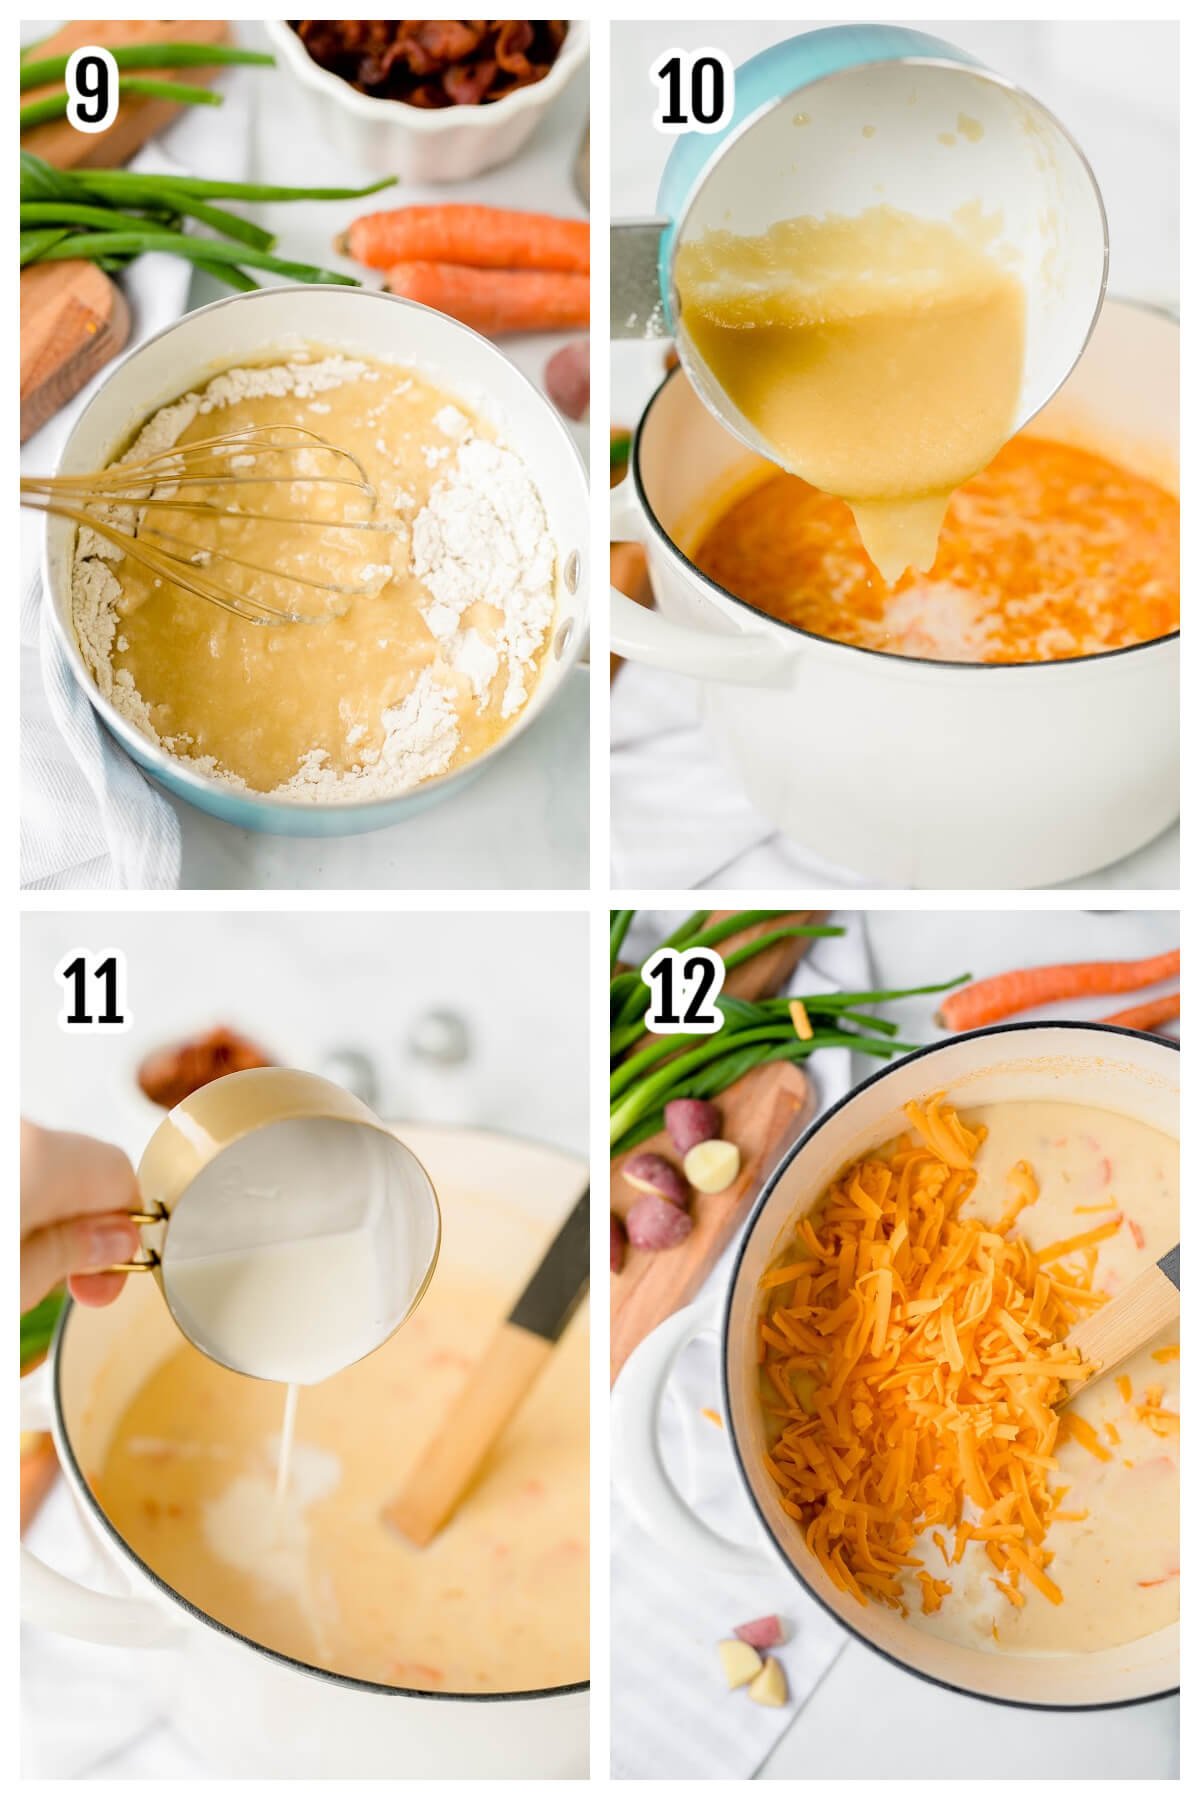 Third set of instruction images for making potato soup. 